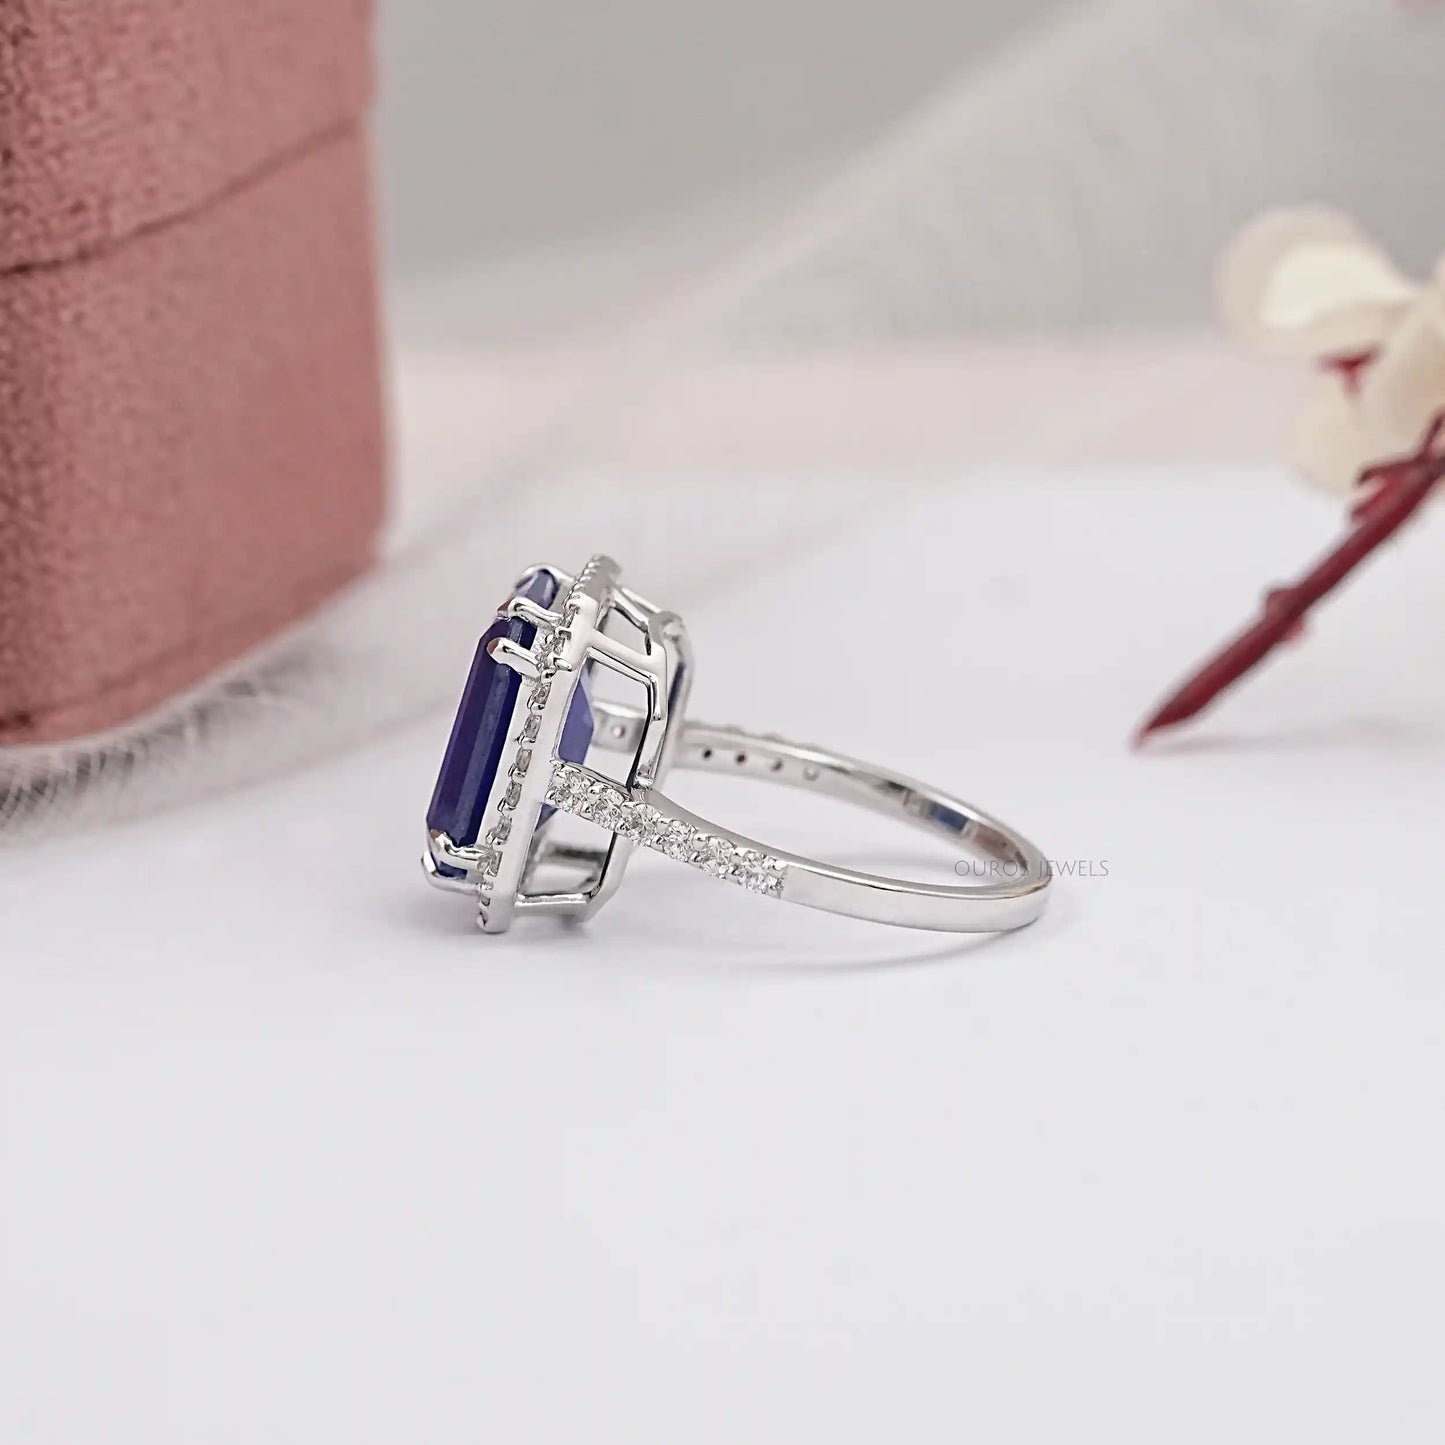 Blue Emerald Cut Halo With Accent Diamond Ring